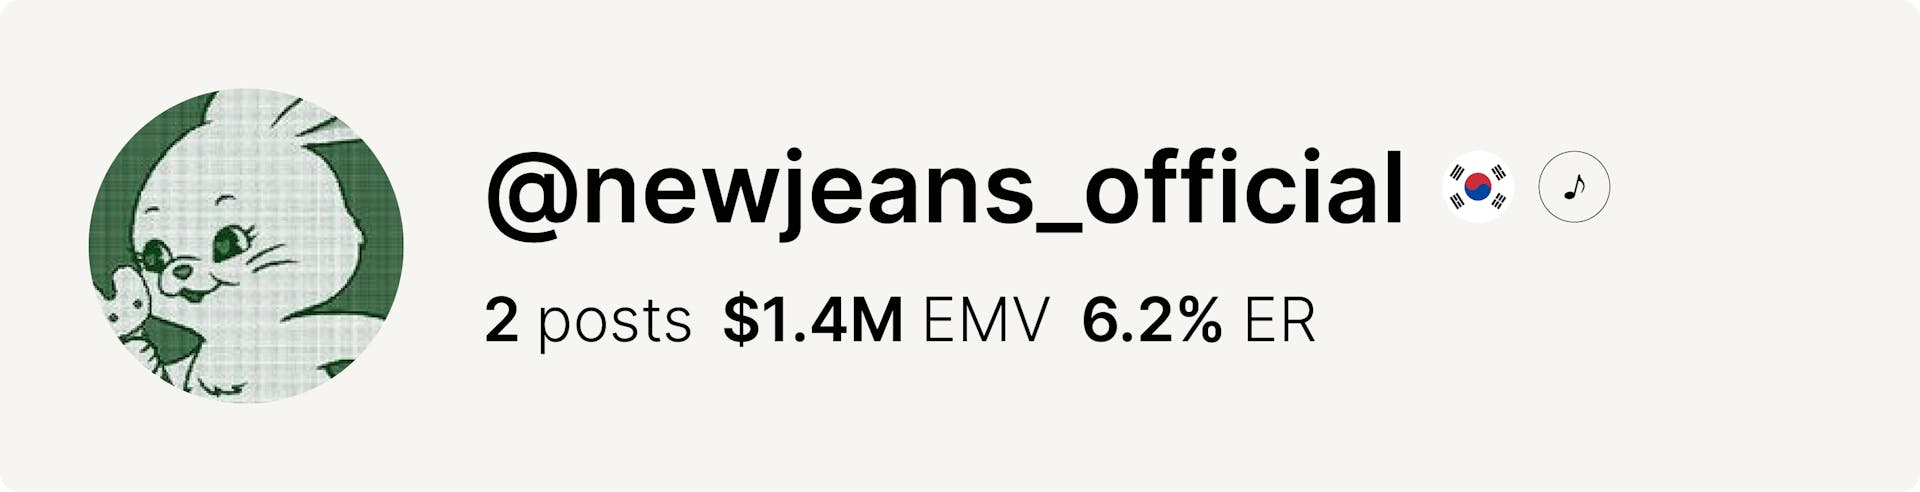 An image of New Jeans's Instagram account and data from the fashion week.